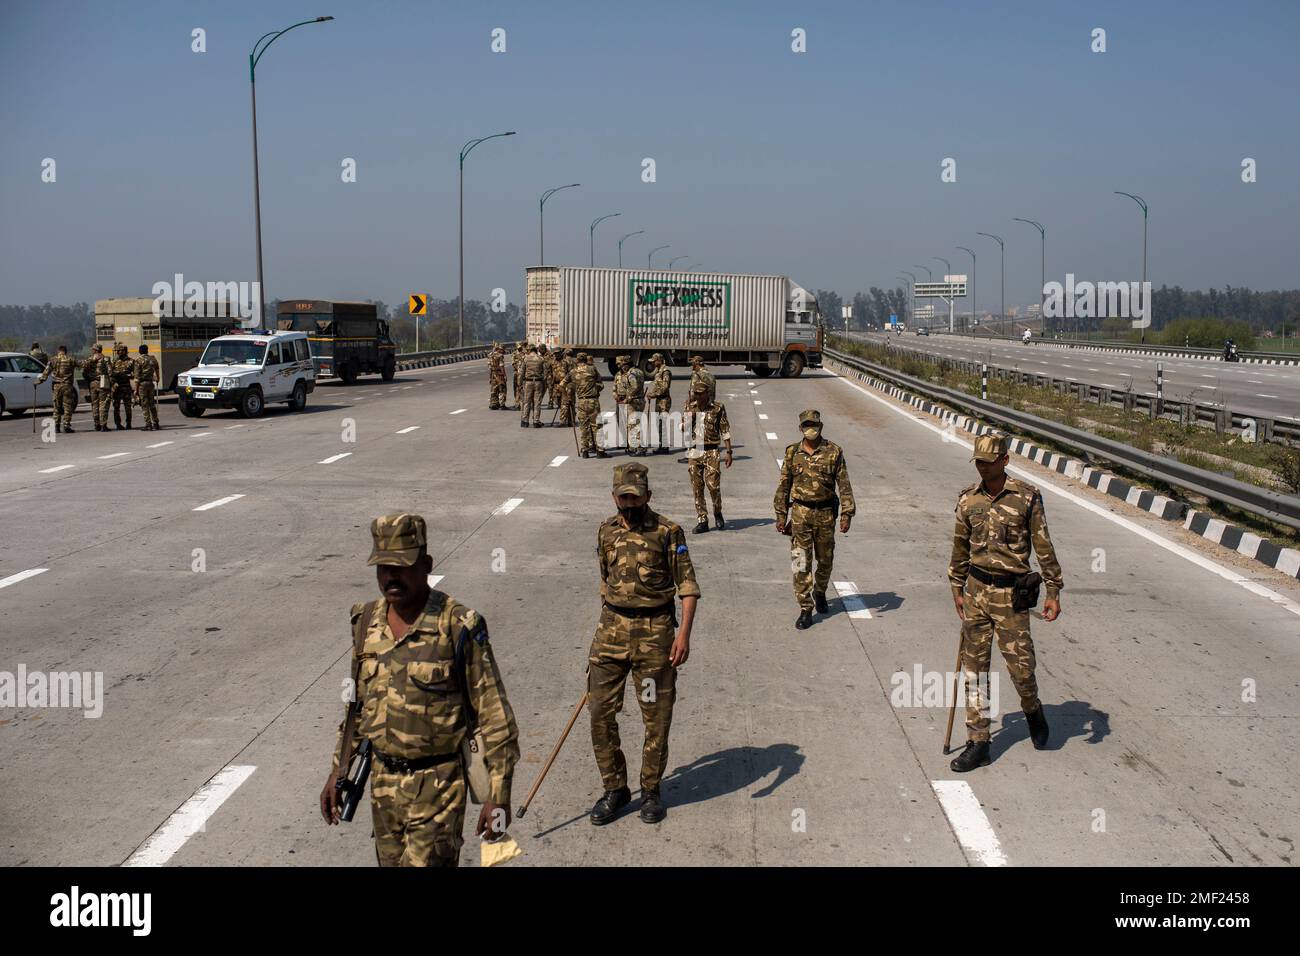 Indian paramilitary soldiers stand guard at a check point on a